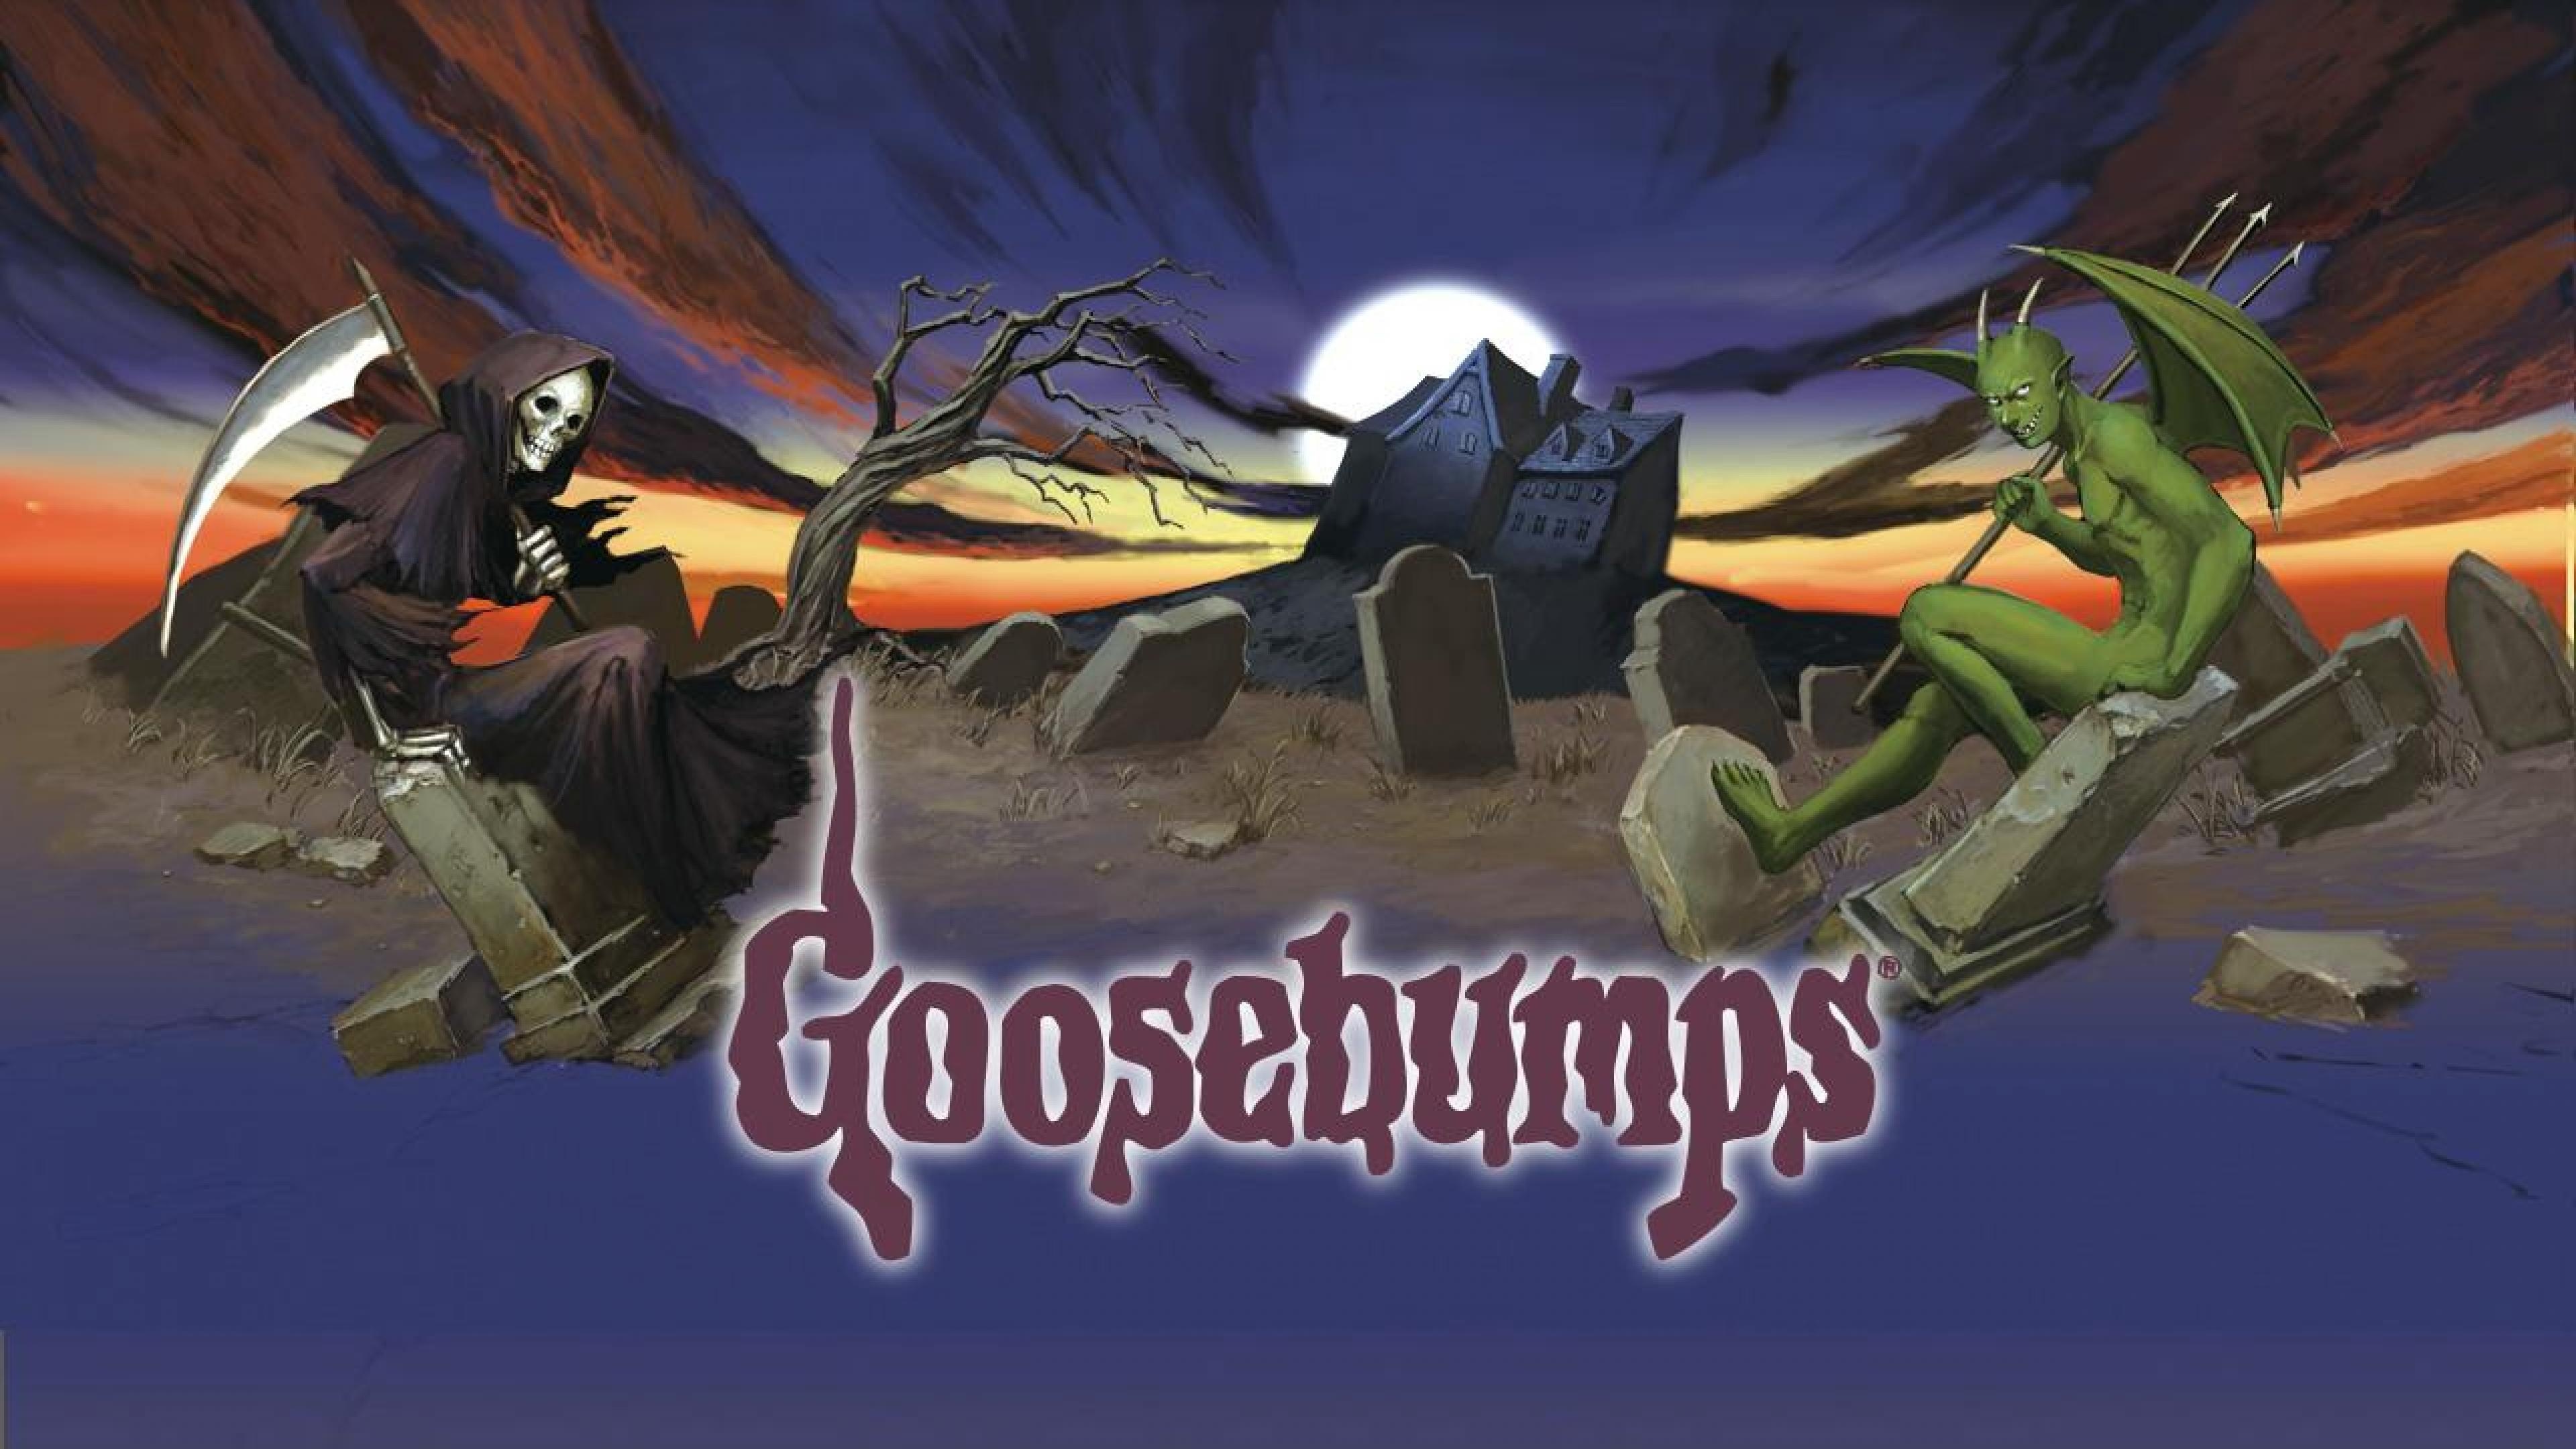 Goosebumps (TV Series): A children's anthology horror television, Grim Reaper, Cemetery, Scary movie characters. 3840x2160 4K Wallpaper.